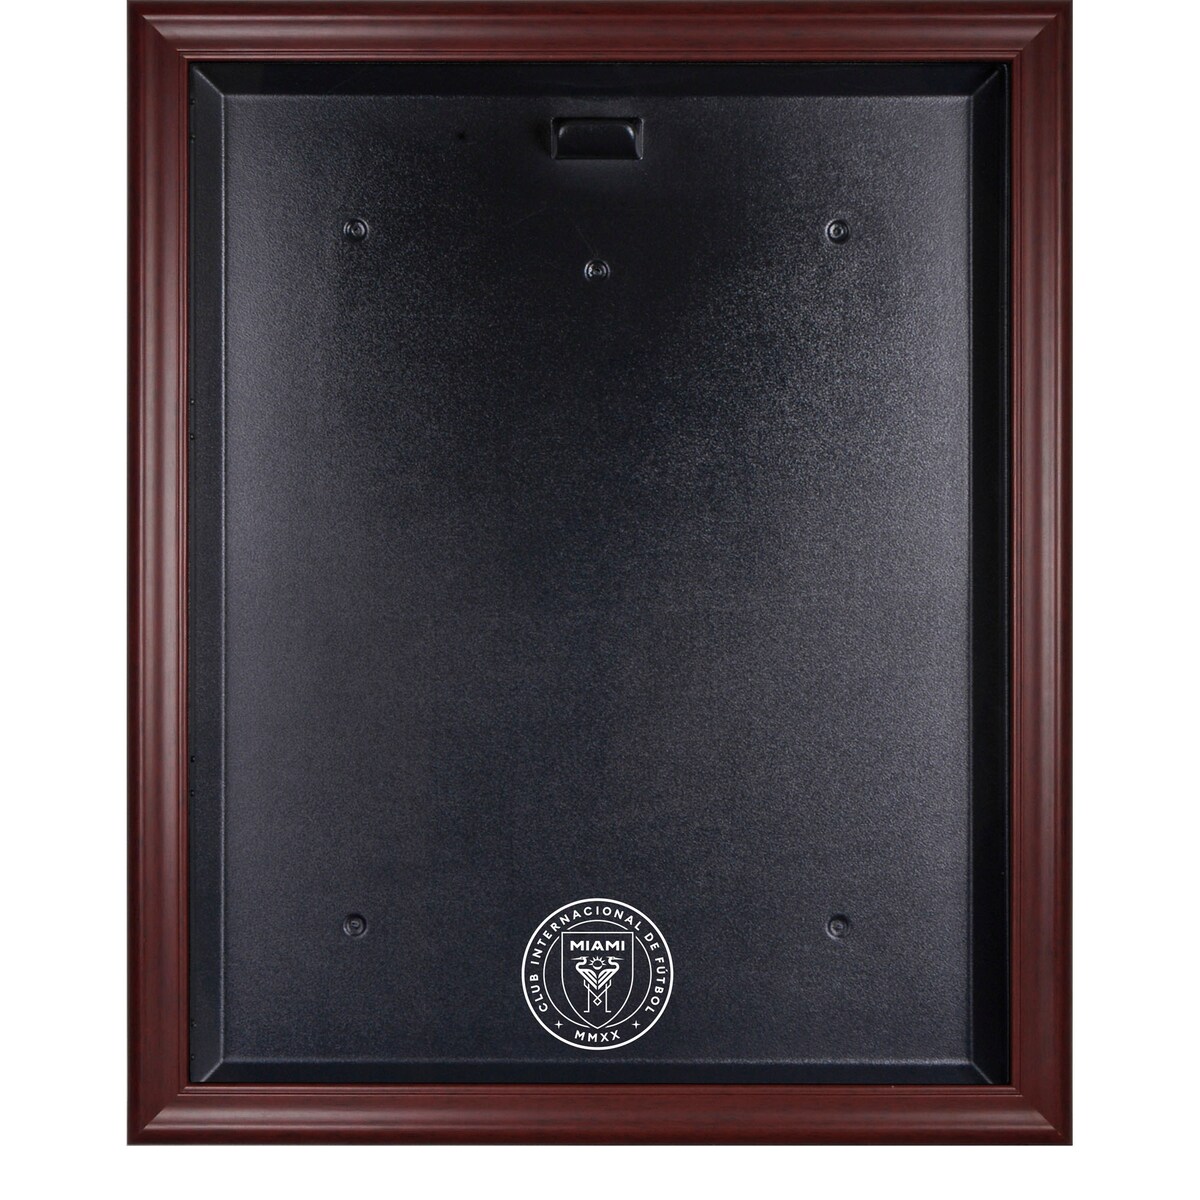 This Inter Miami CF framed logo jersey display case is made from a durable, high strength injection mold backing, and th...